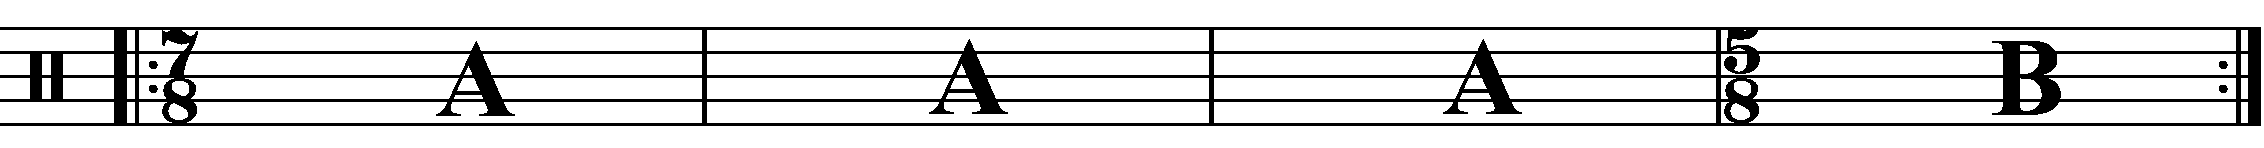 A four bar phrase using 7/8 for the 'B' section.